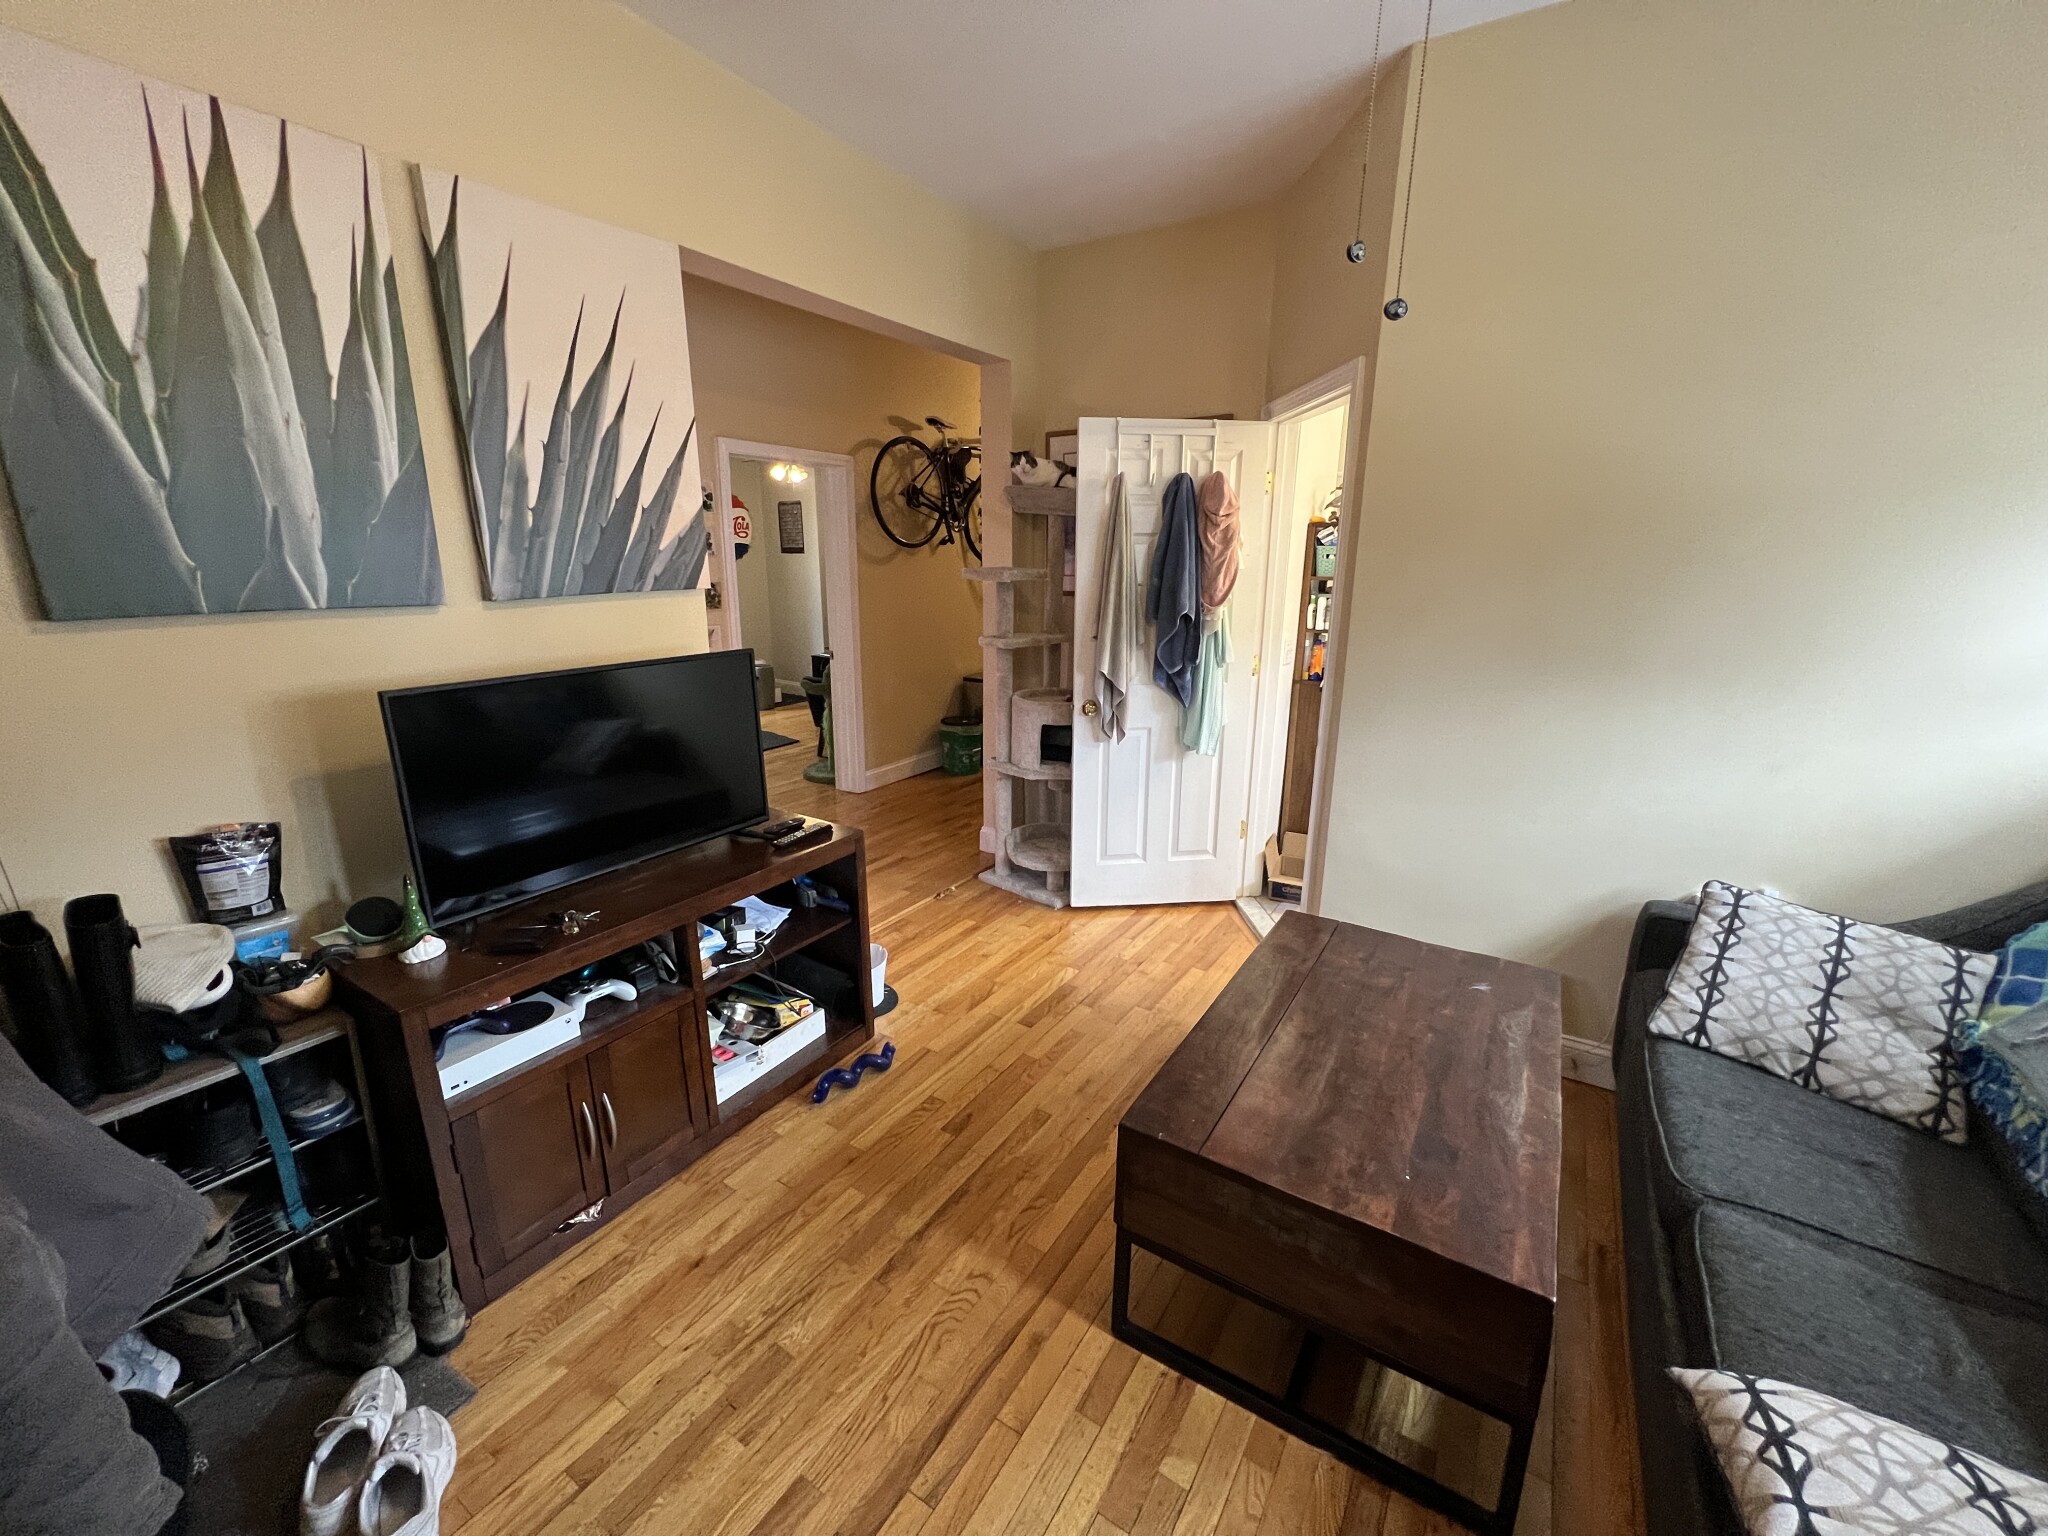 Photos of apartment on Ossipee Rd.,Somerville MA 02144